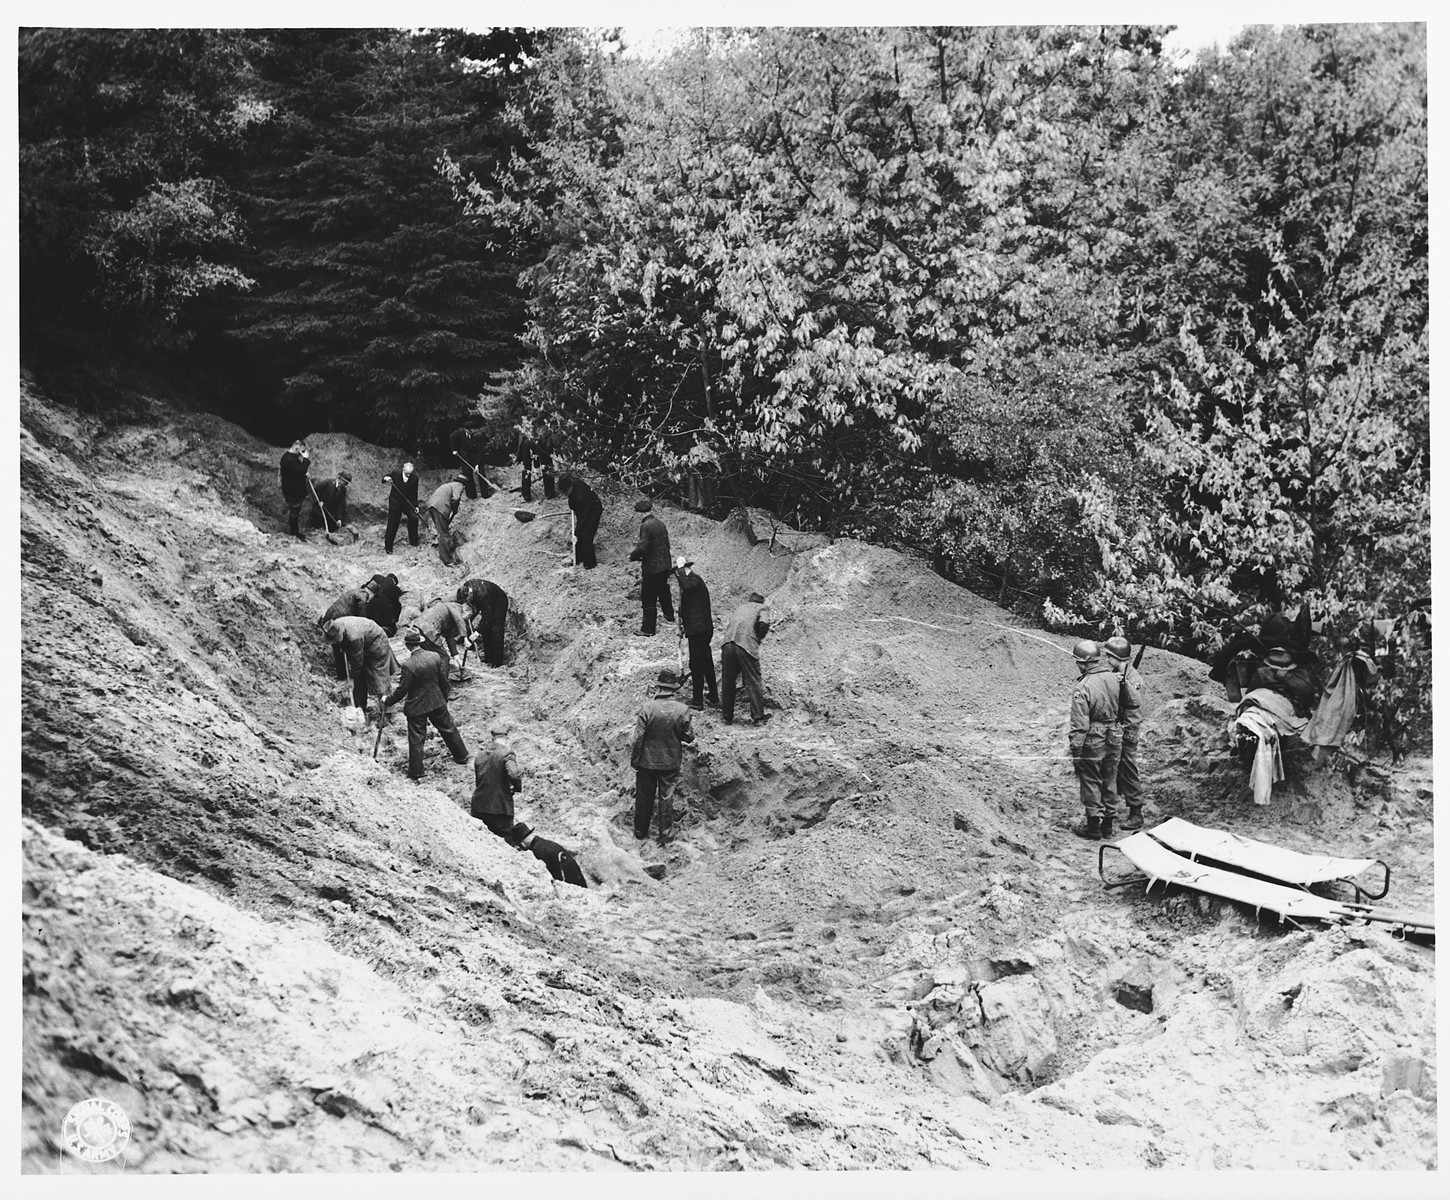 Under the supervision of American soldiers, German civilians exhume the bodies of 71 political prisoners from a mass grave on Wenzelnberg near Solingen-Ohligs.  

The victims, most of whom were taken from Luettringhausen prison, were shot and buried by the Gestapo following orders to eliminate all Reich enemies just before the end of the war.